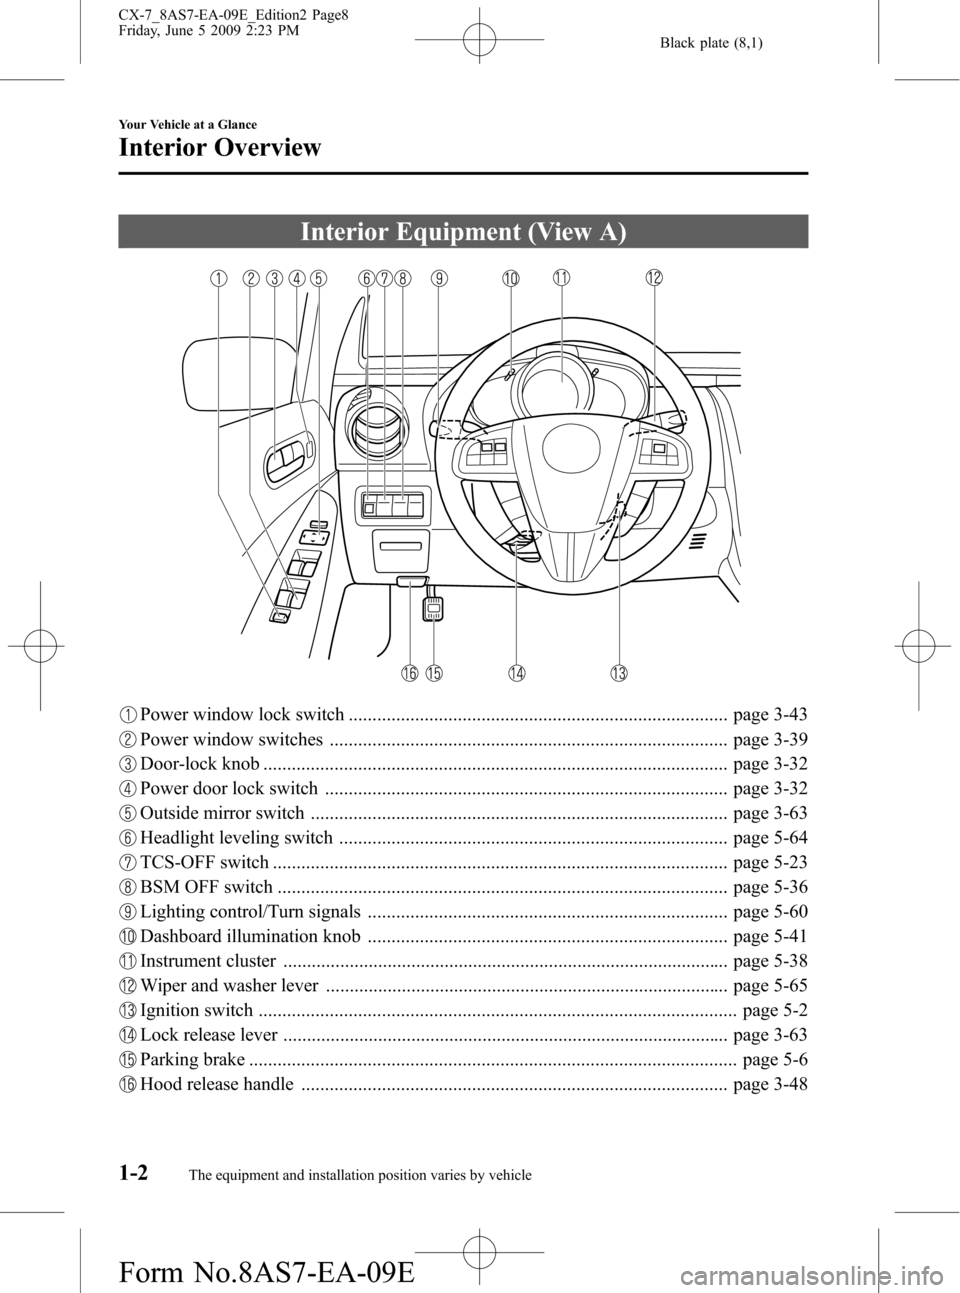 MAZDA MODEL CX-7 2010  Owners Manual (in English) Black plate (8,1)
Interior Equipment (View A)
Power window lock switch ................................................................................ page 3-43
Power window switches ................